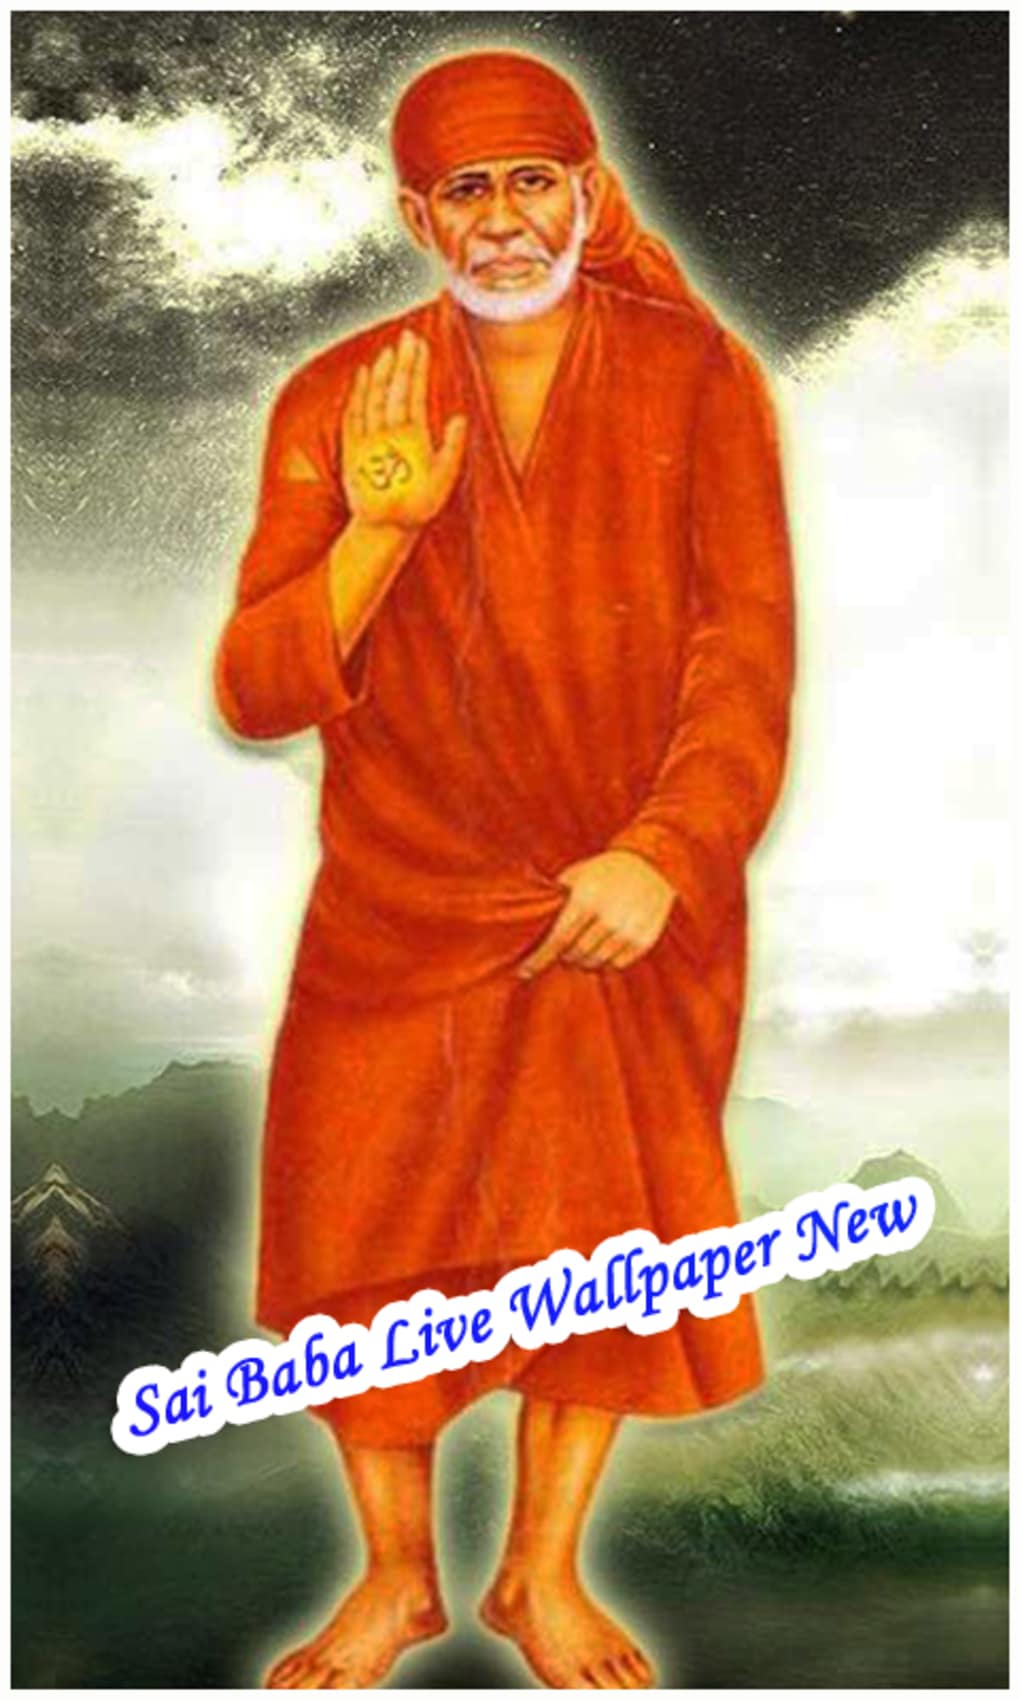 Sai Baba Live Wallpaper New for Android - Download